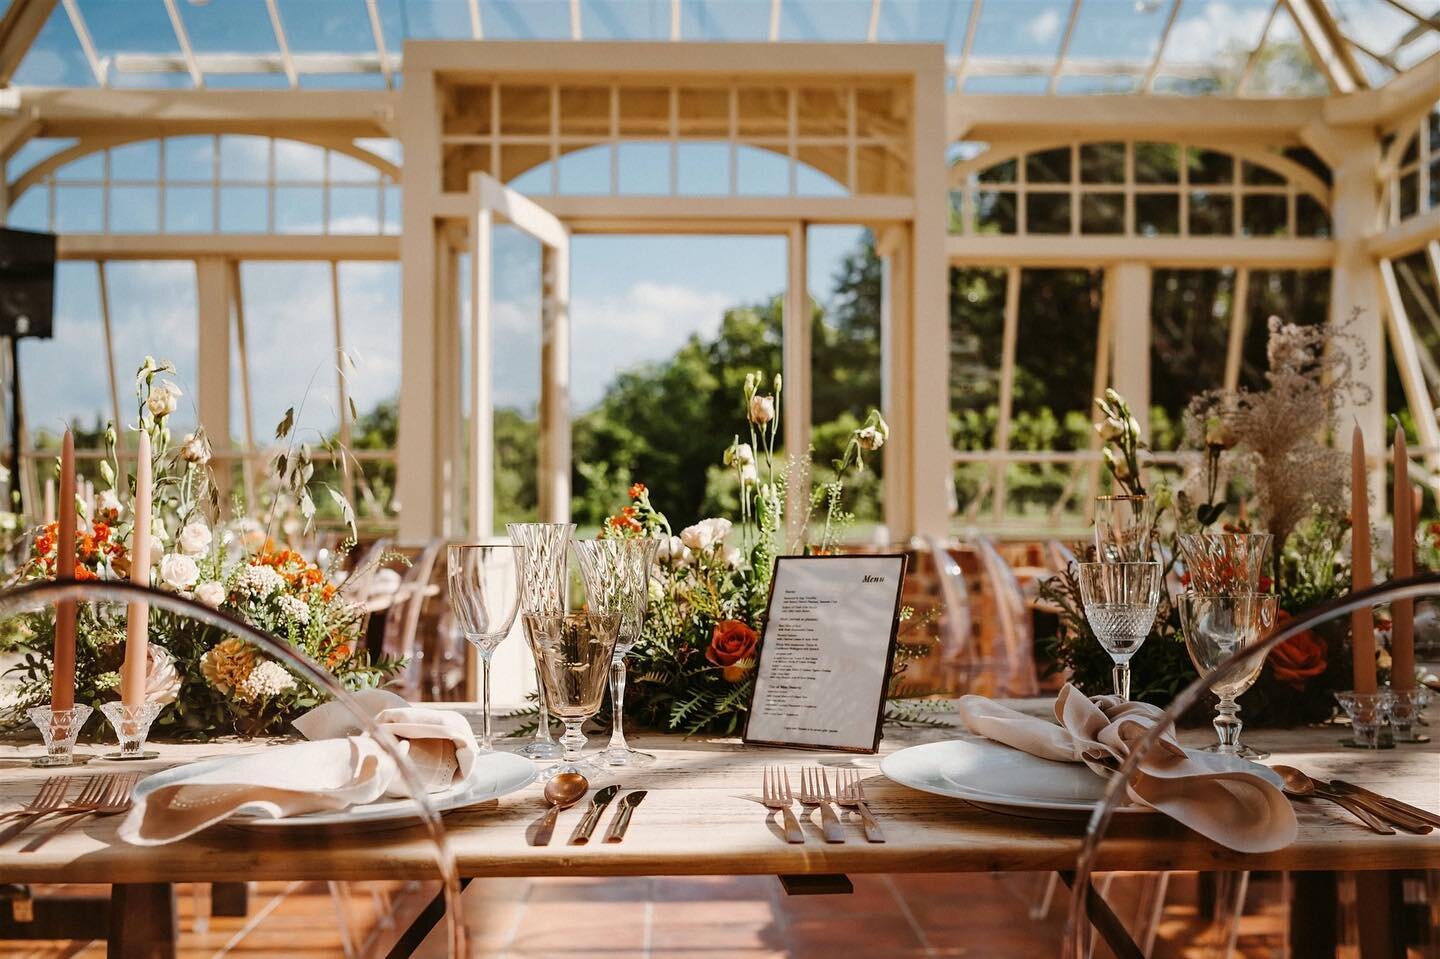 WEDDING // When most weddings were only allowed to be 30. The gorgeous bride let me run with the table settings. Such a gorgeous result. 
/
/
/
/ 
/ 
#party #wedding #microwedding #glasshouse #styling #eventplanner #surrey #surreyhills